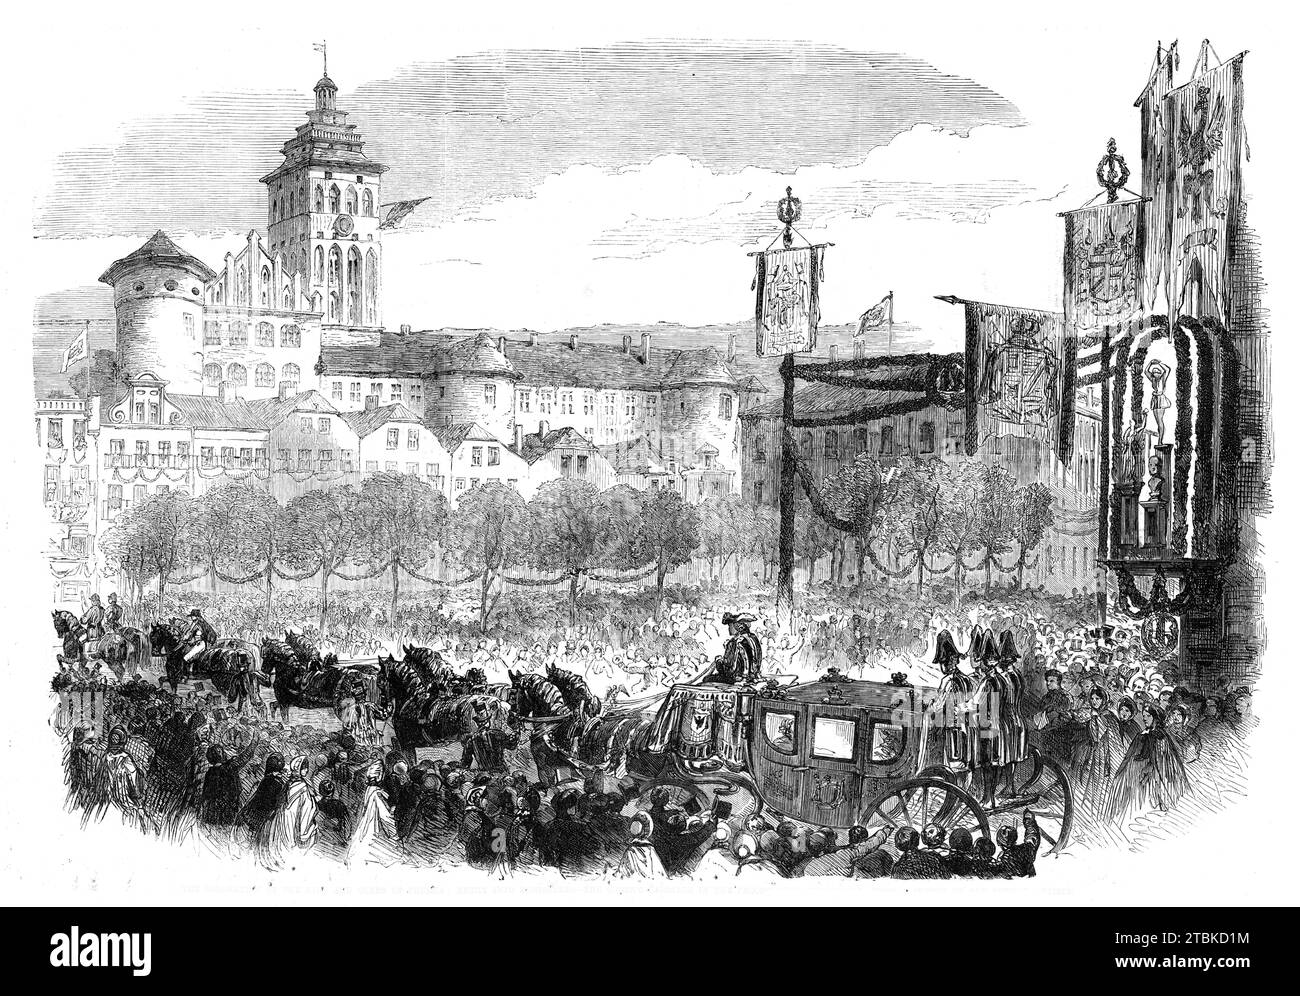 The Coronation of the King and Queen of Prussia: entry into K&#xf6;nigsberg [now Kaliningrad] - the Queen's carriage in the procession to the castle - from a sketch by our special artists, 1861. 'On leaving the church the King and the Queen, as soon as they made their appearance in the court of the palace, were loudly cheered, and the bands played &quot;God Save the King&quot; and other music during the return of the procession to the palace...'. From &quot;Illustrated London News&quot;, 1861. Stock Photo